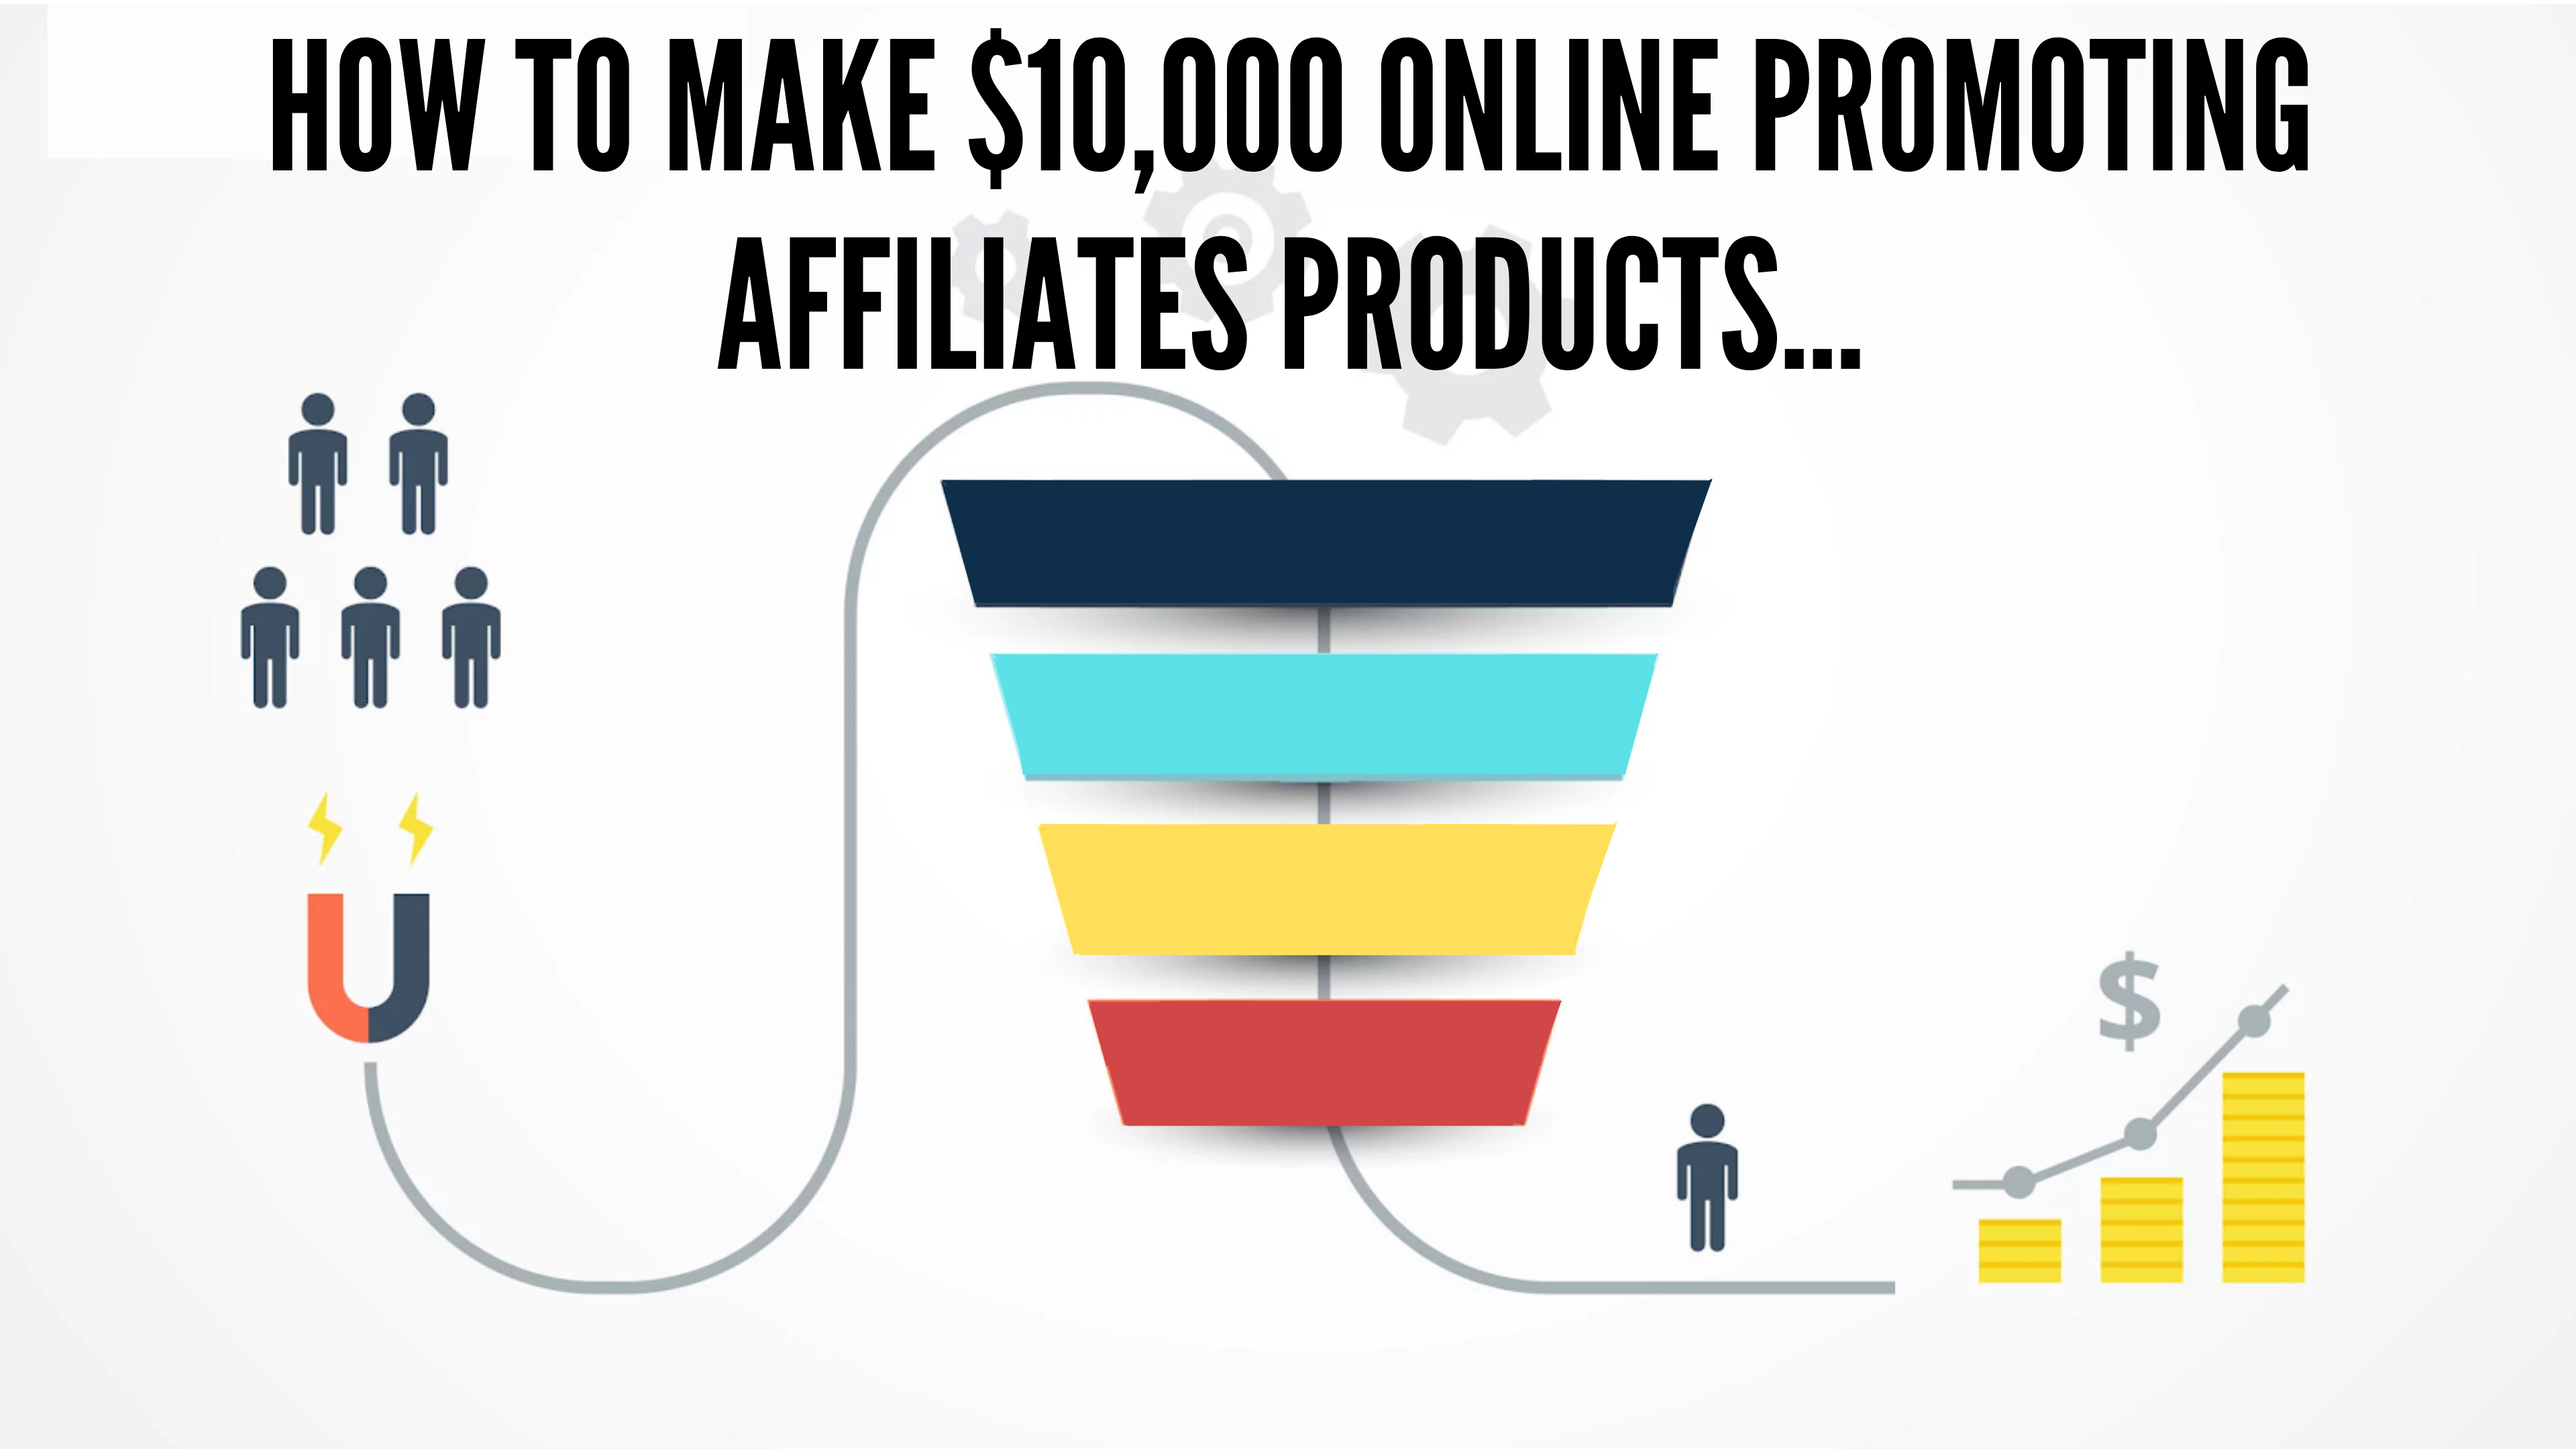 (9pm Session) How to make $10,000 online promoting affiliates products...